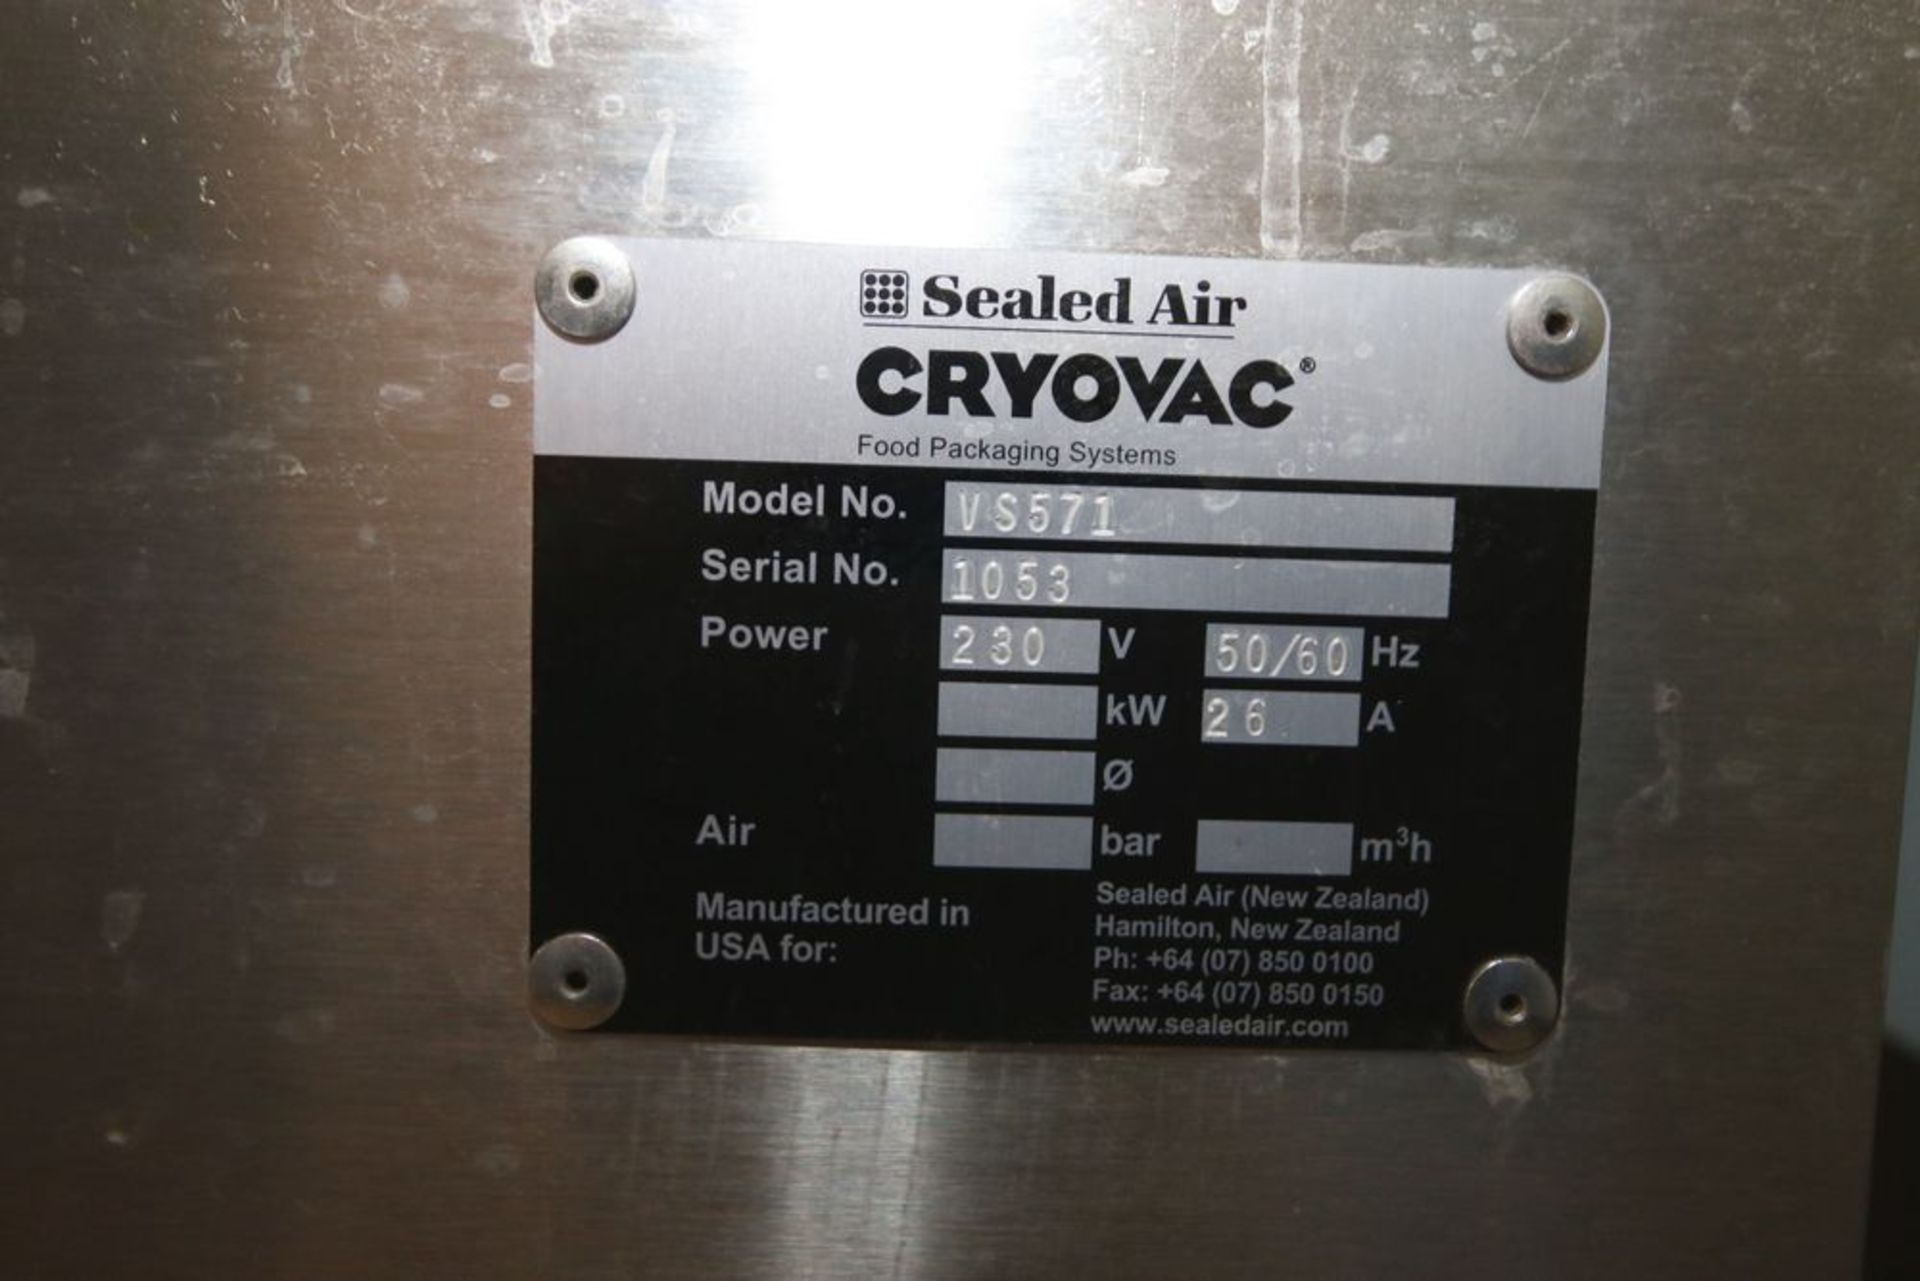 Cryovac UltraSource S/S Vacuum Skin Packaging Machine, M/N VS571, S/N 1053, 230 Volts, with Aprox. - Image 4 of 9